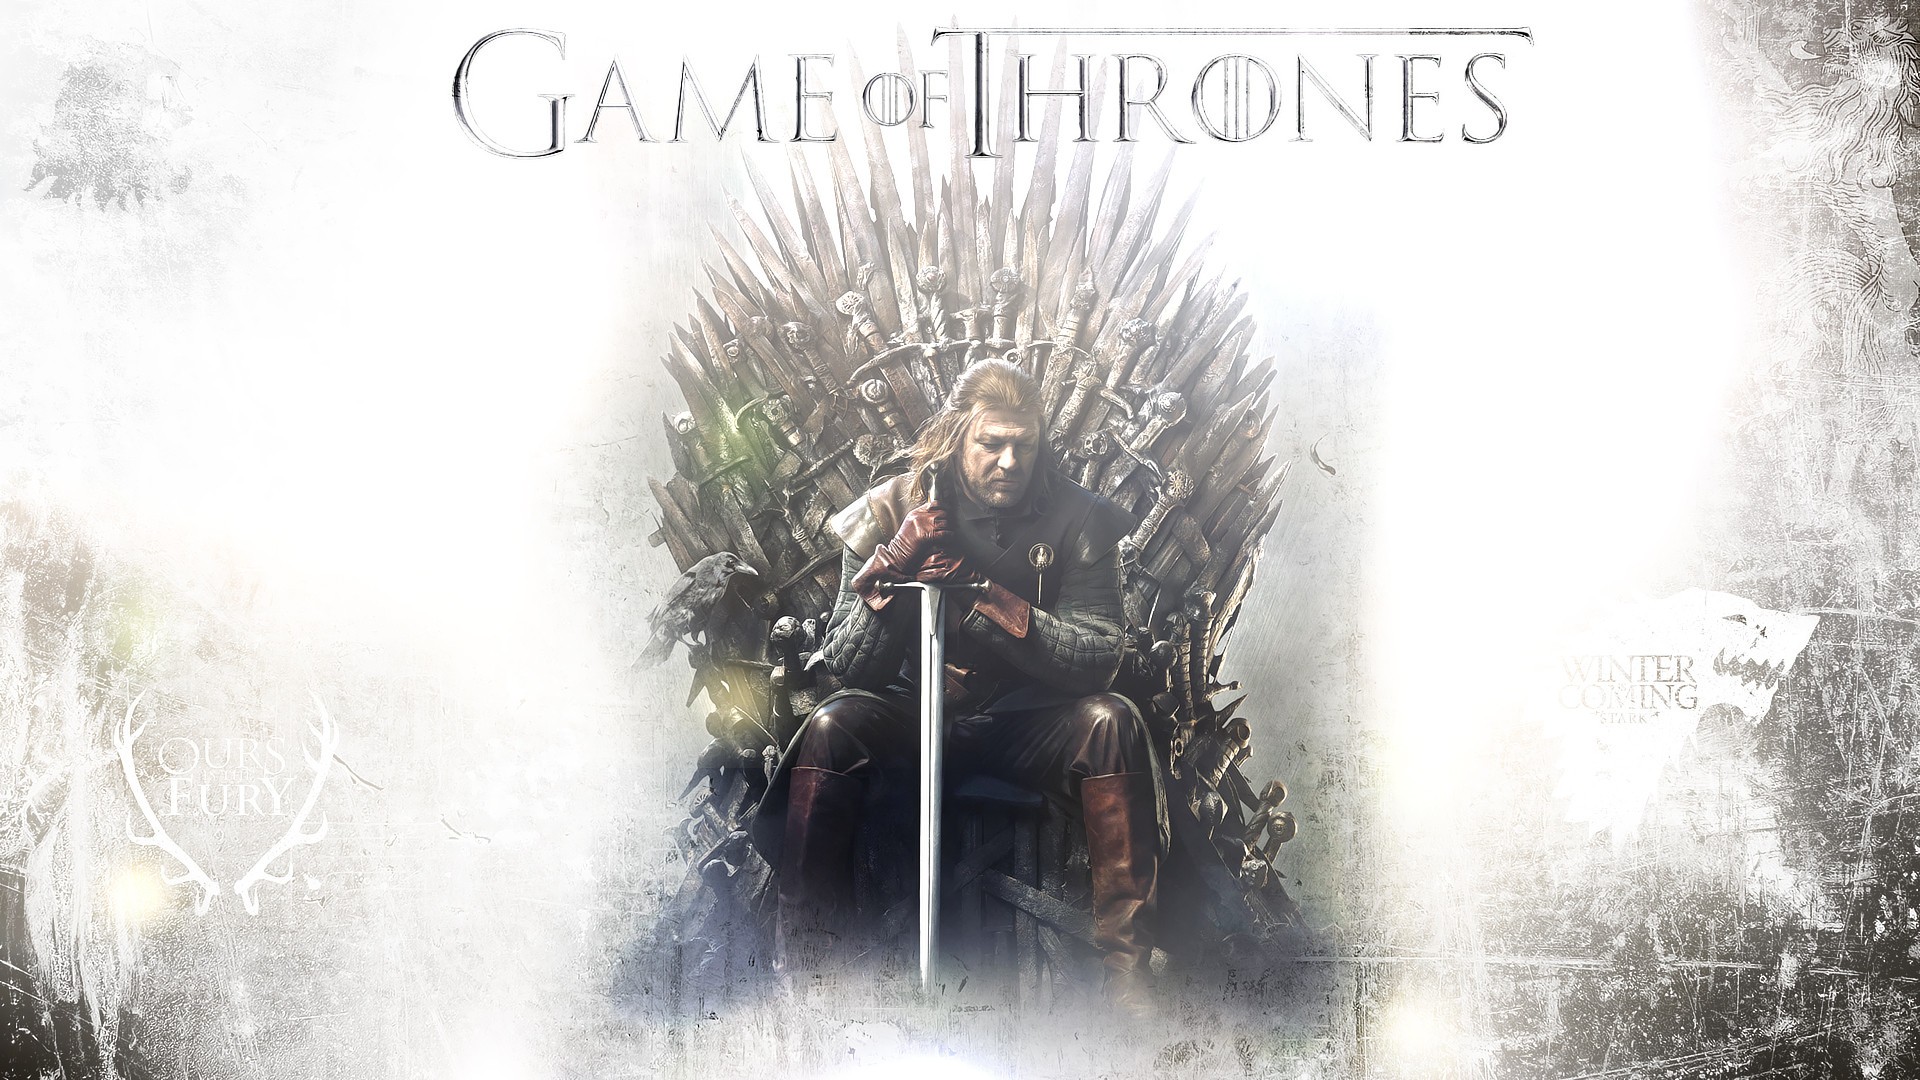 General 1920x1080 Game of Thrones Ned Stark Iron Throne TV series